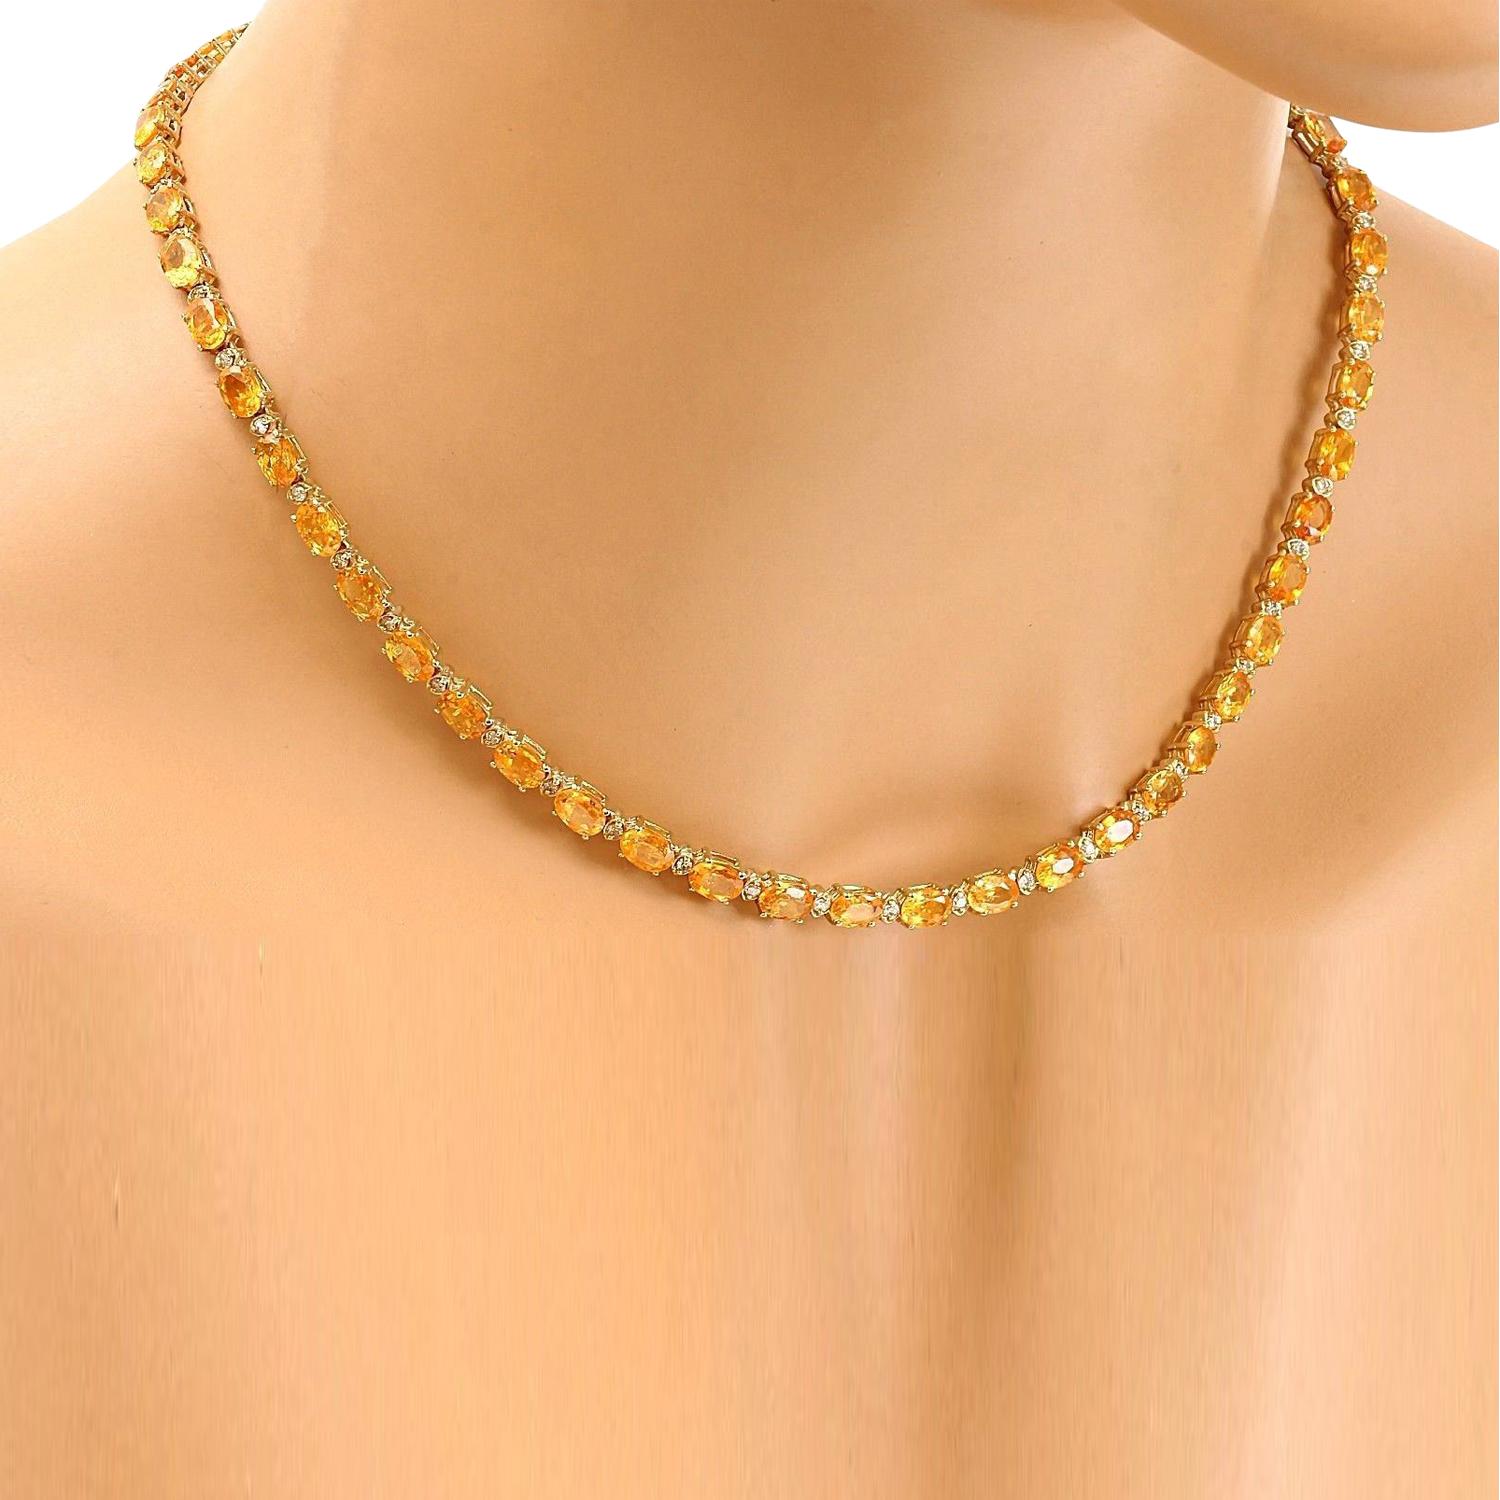 41.25 Carat Natural Citrine 14K Solid Yellow Gold Diamond Necklace
 Item Type: Necklace
 Item Style: Tennis
 Item Length: 17 Inches
 Material: 14K Yellow Gold
 Mainstone: Citrine
 Stone Color: Orange
 Stone Weight: 40.00 Carat
 Stone Shape: Oval
